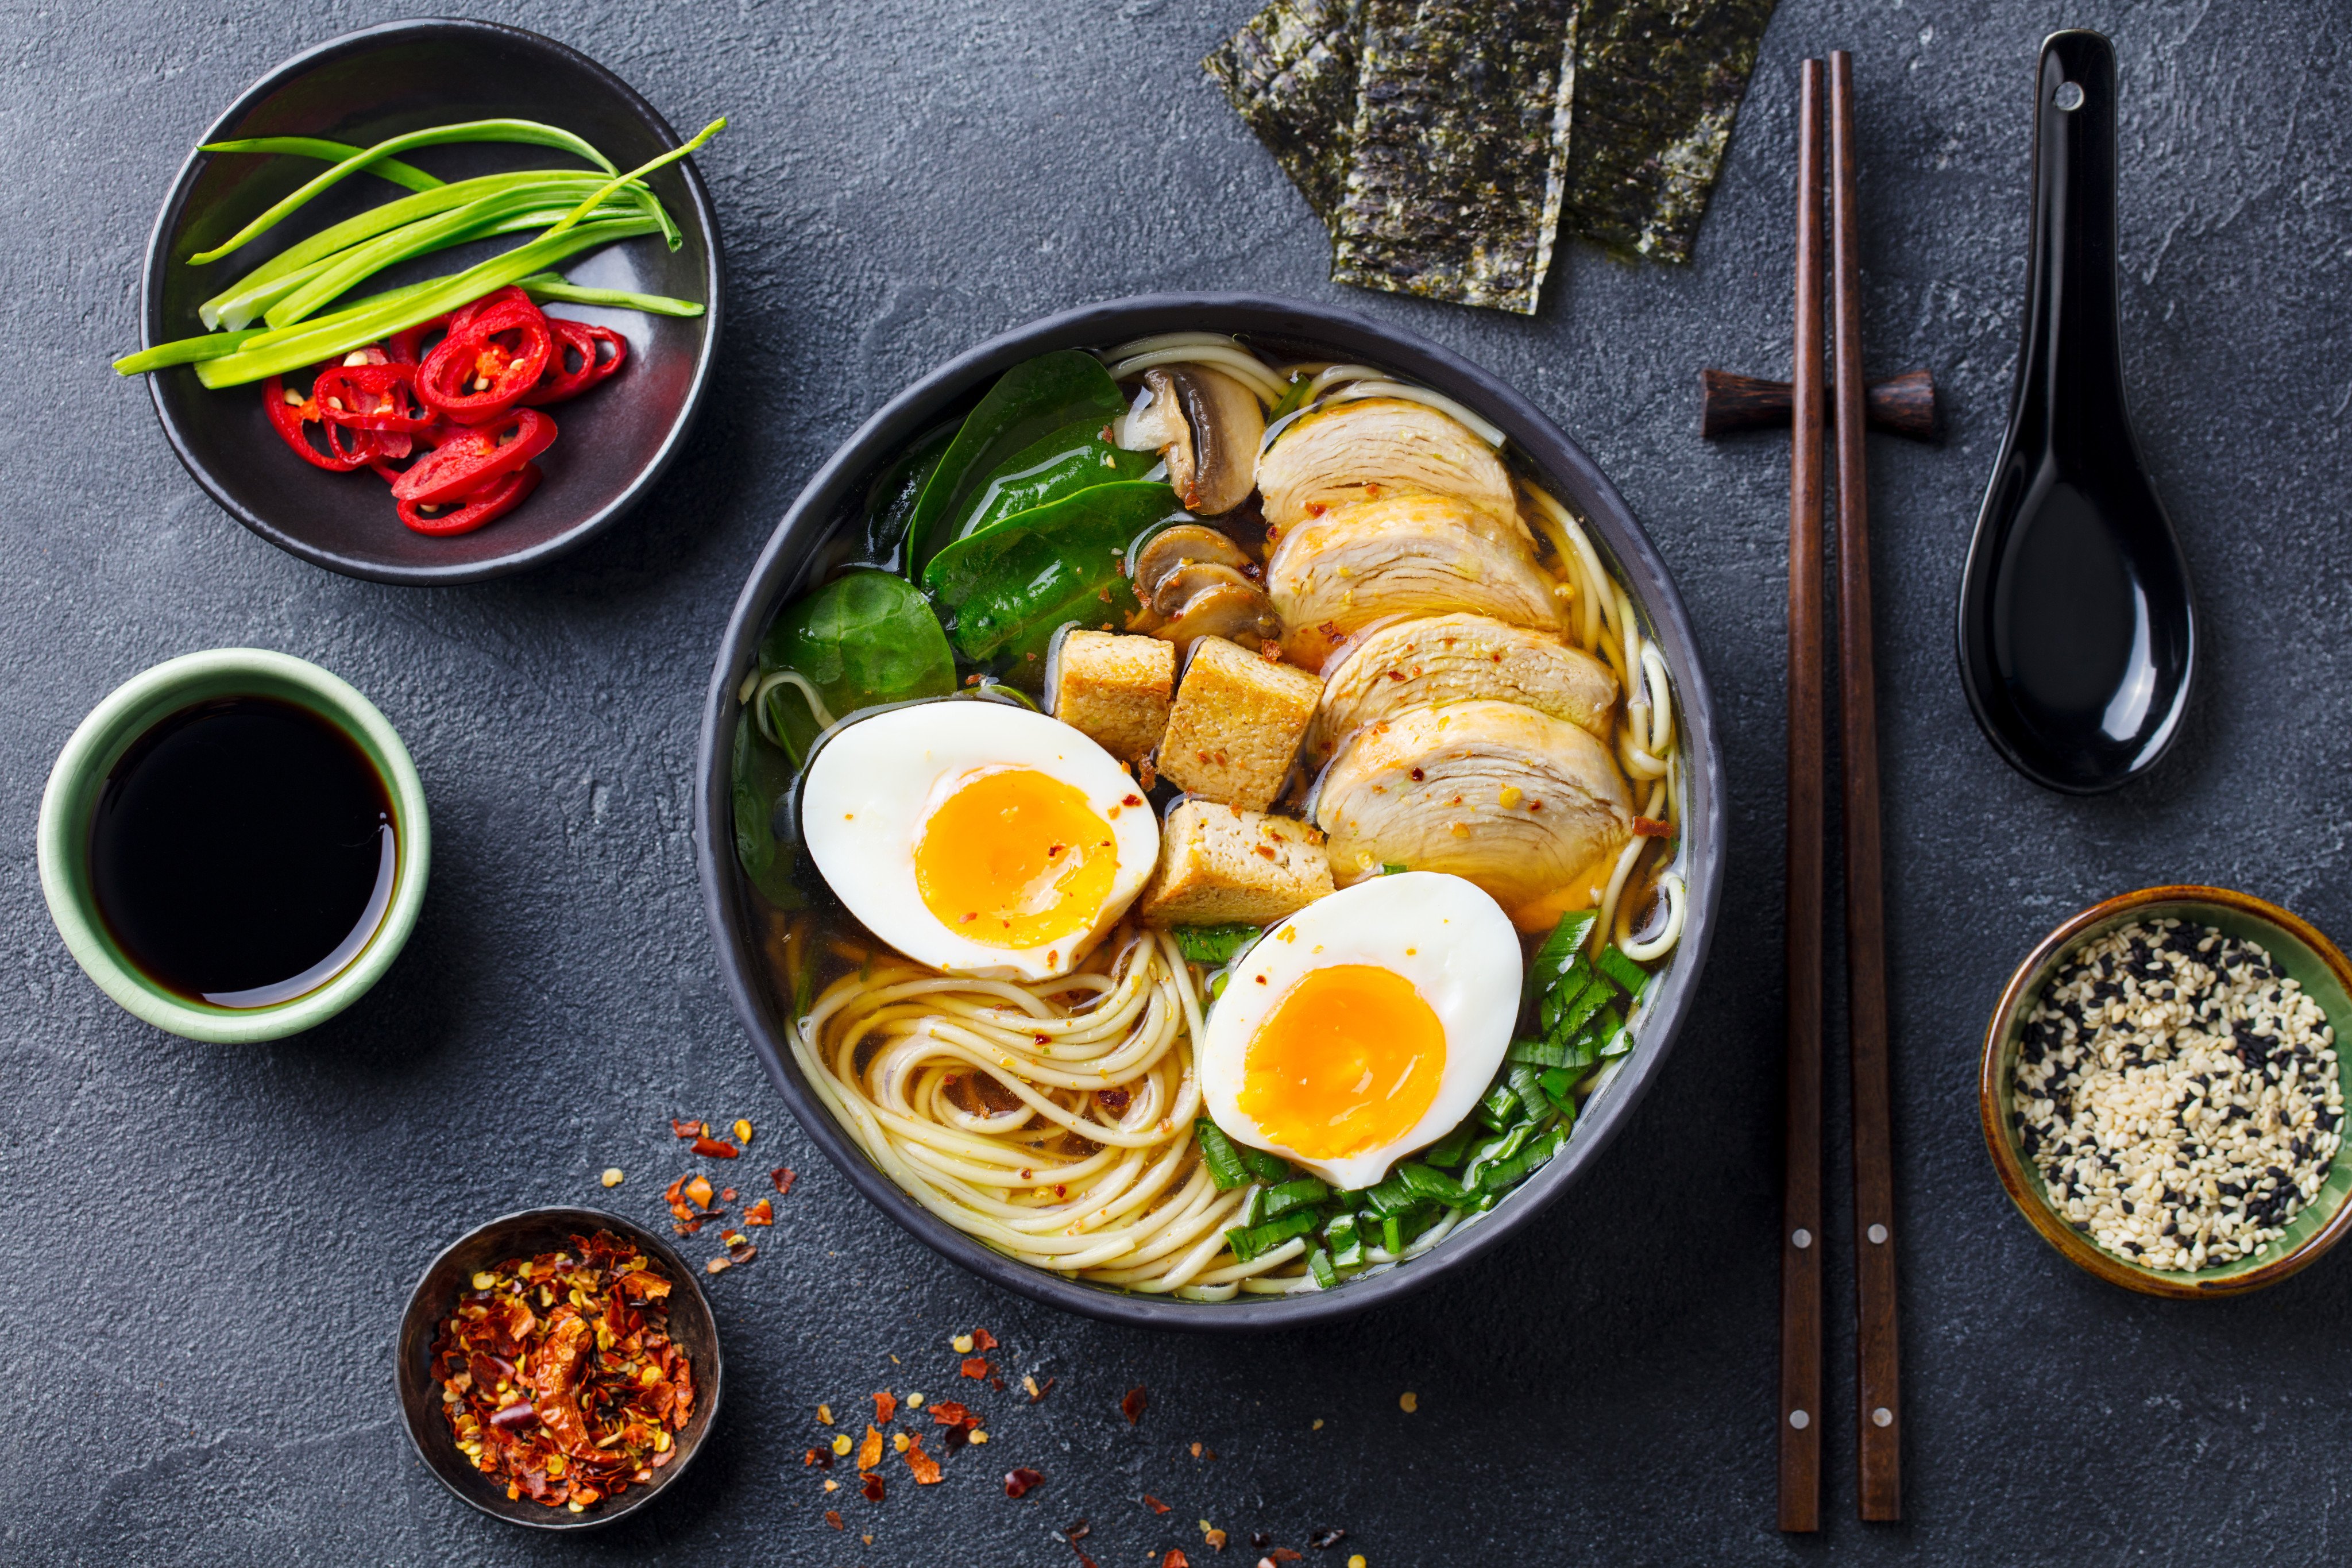 Ramen (above) and tempura may seem like typical Japanese dishes, but they, like curry, came from overseas. Photo: Shutterstock